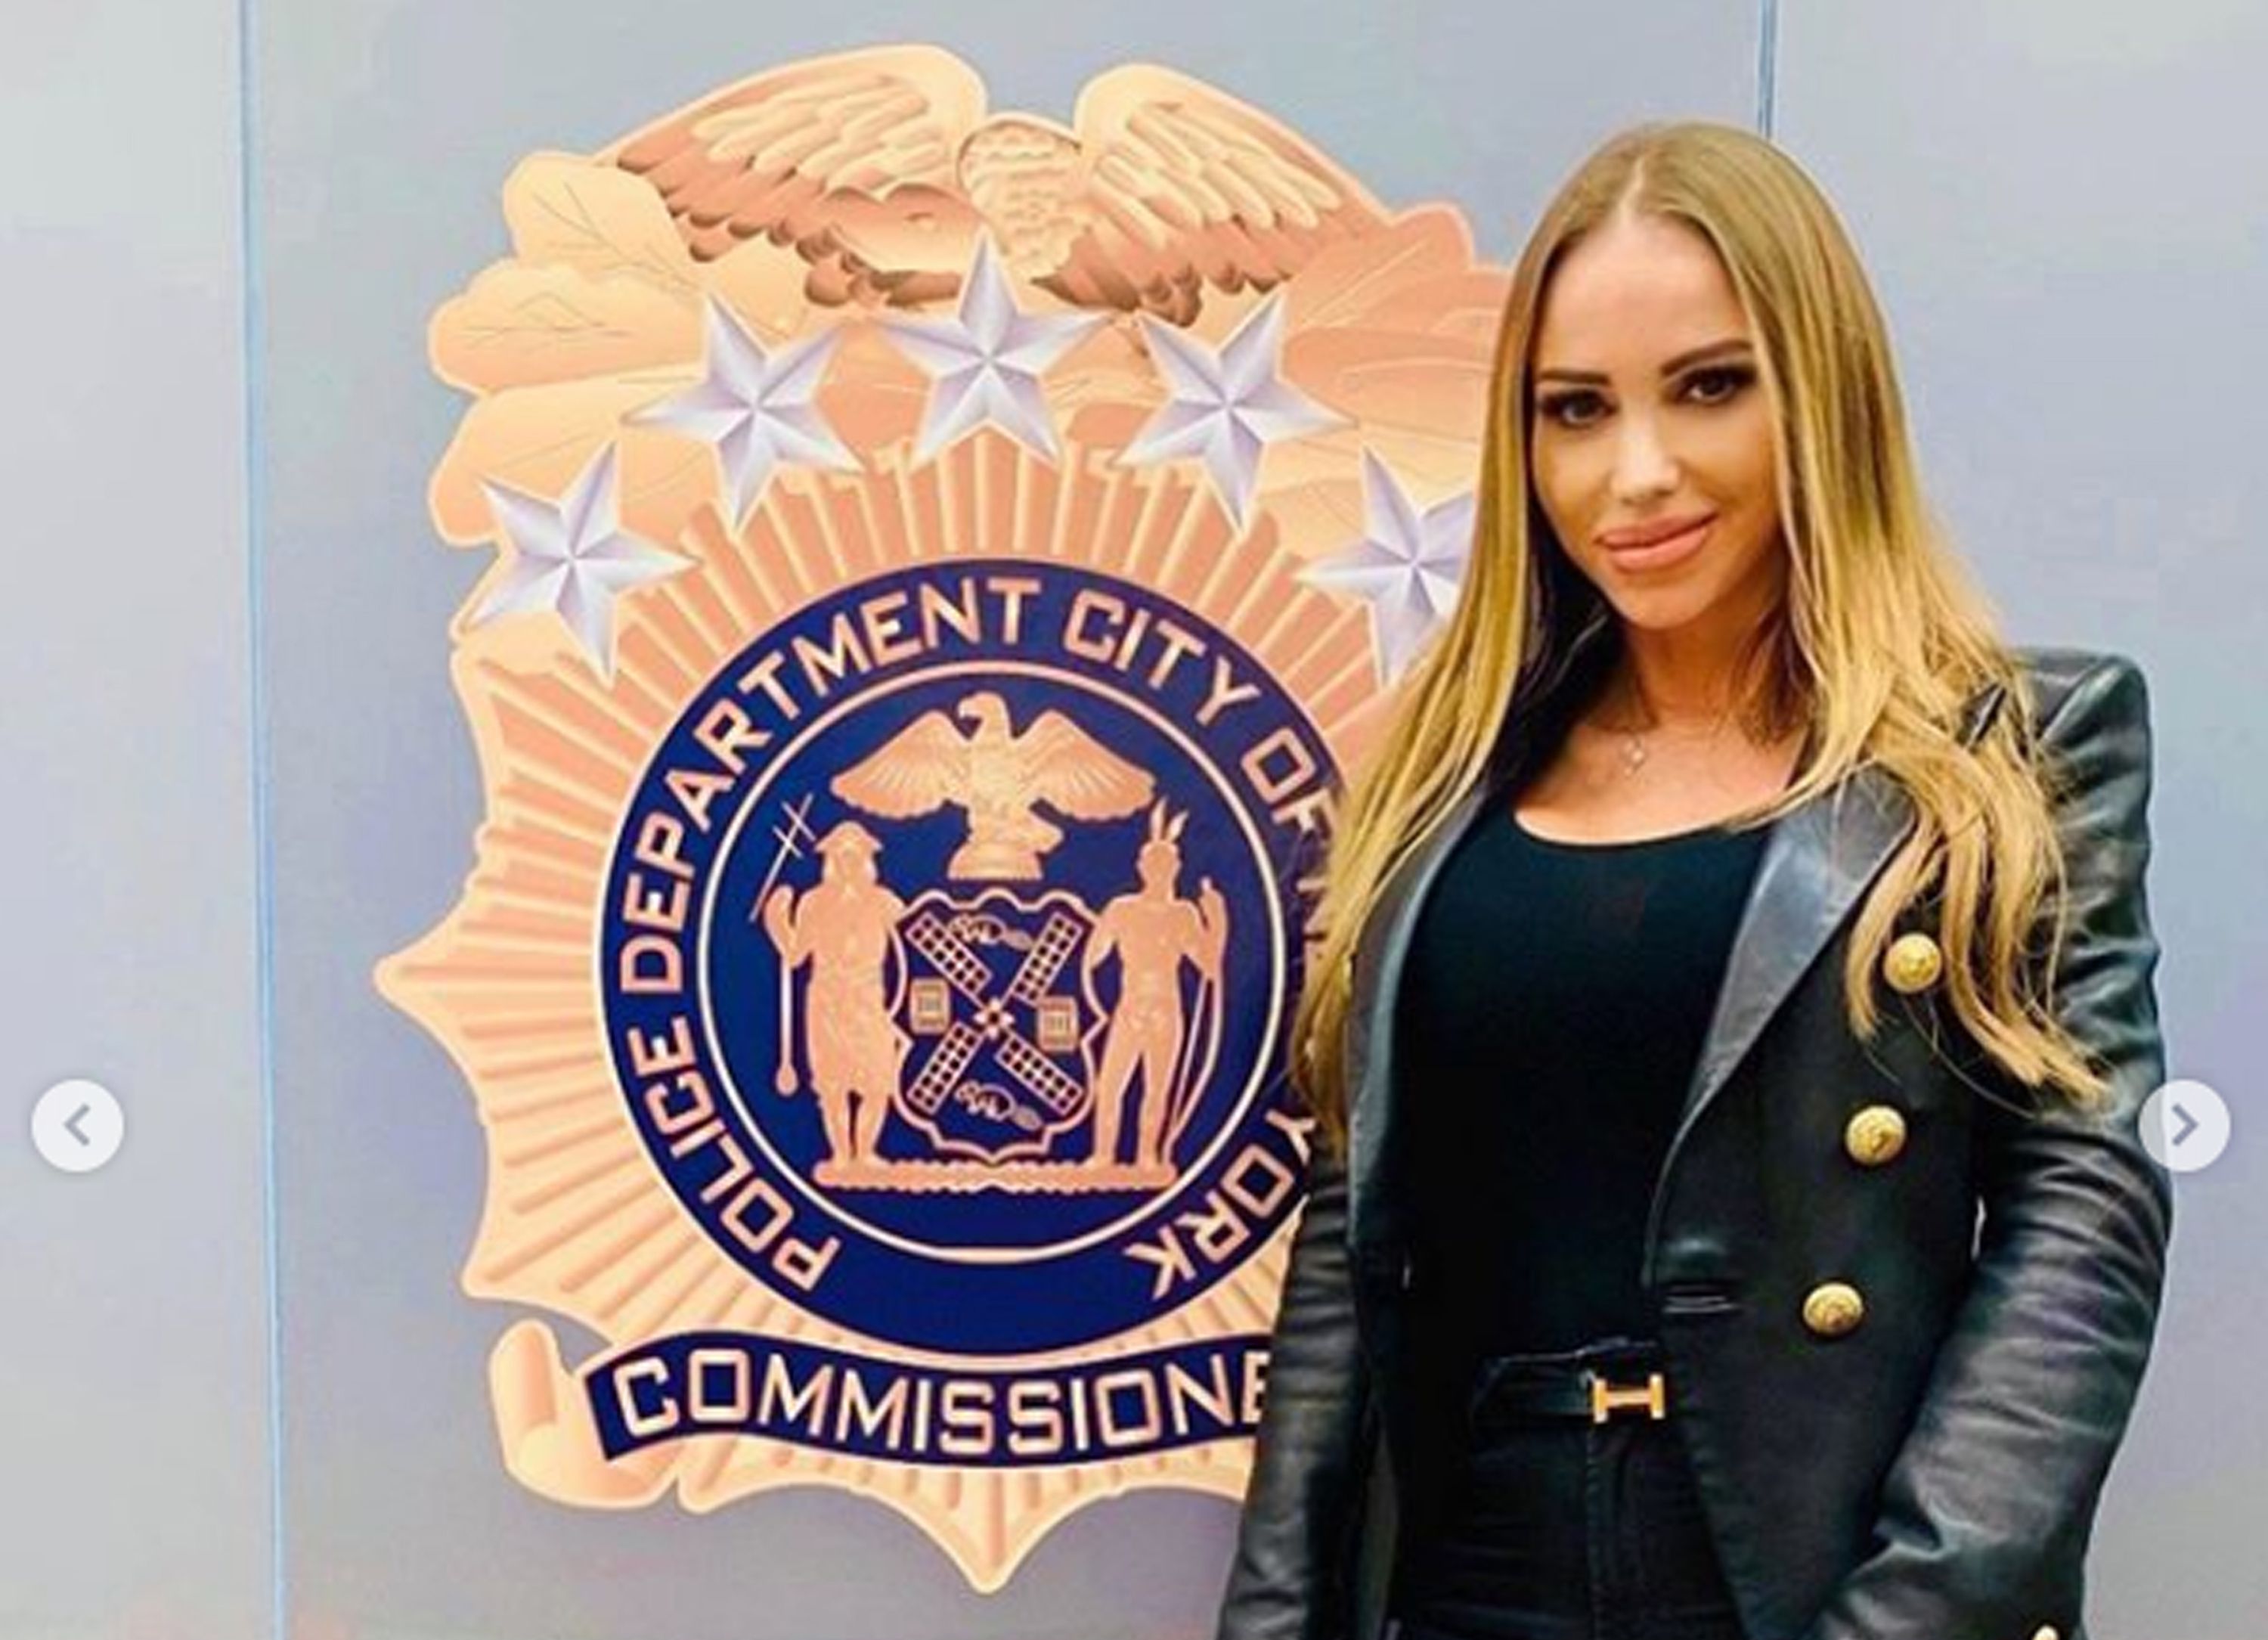 German porn star apologizes on Instagram for controversial NYPD  headquarters visit